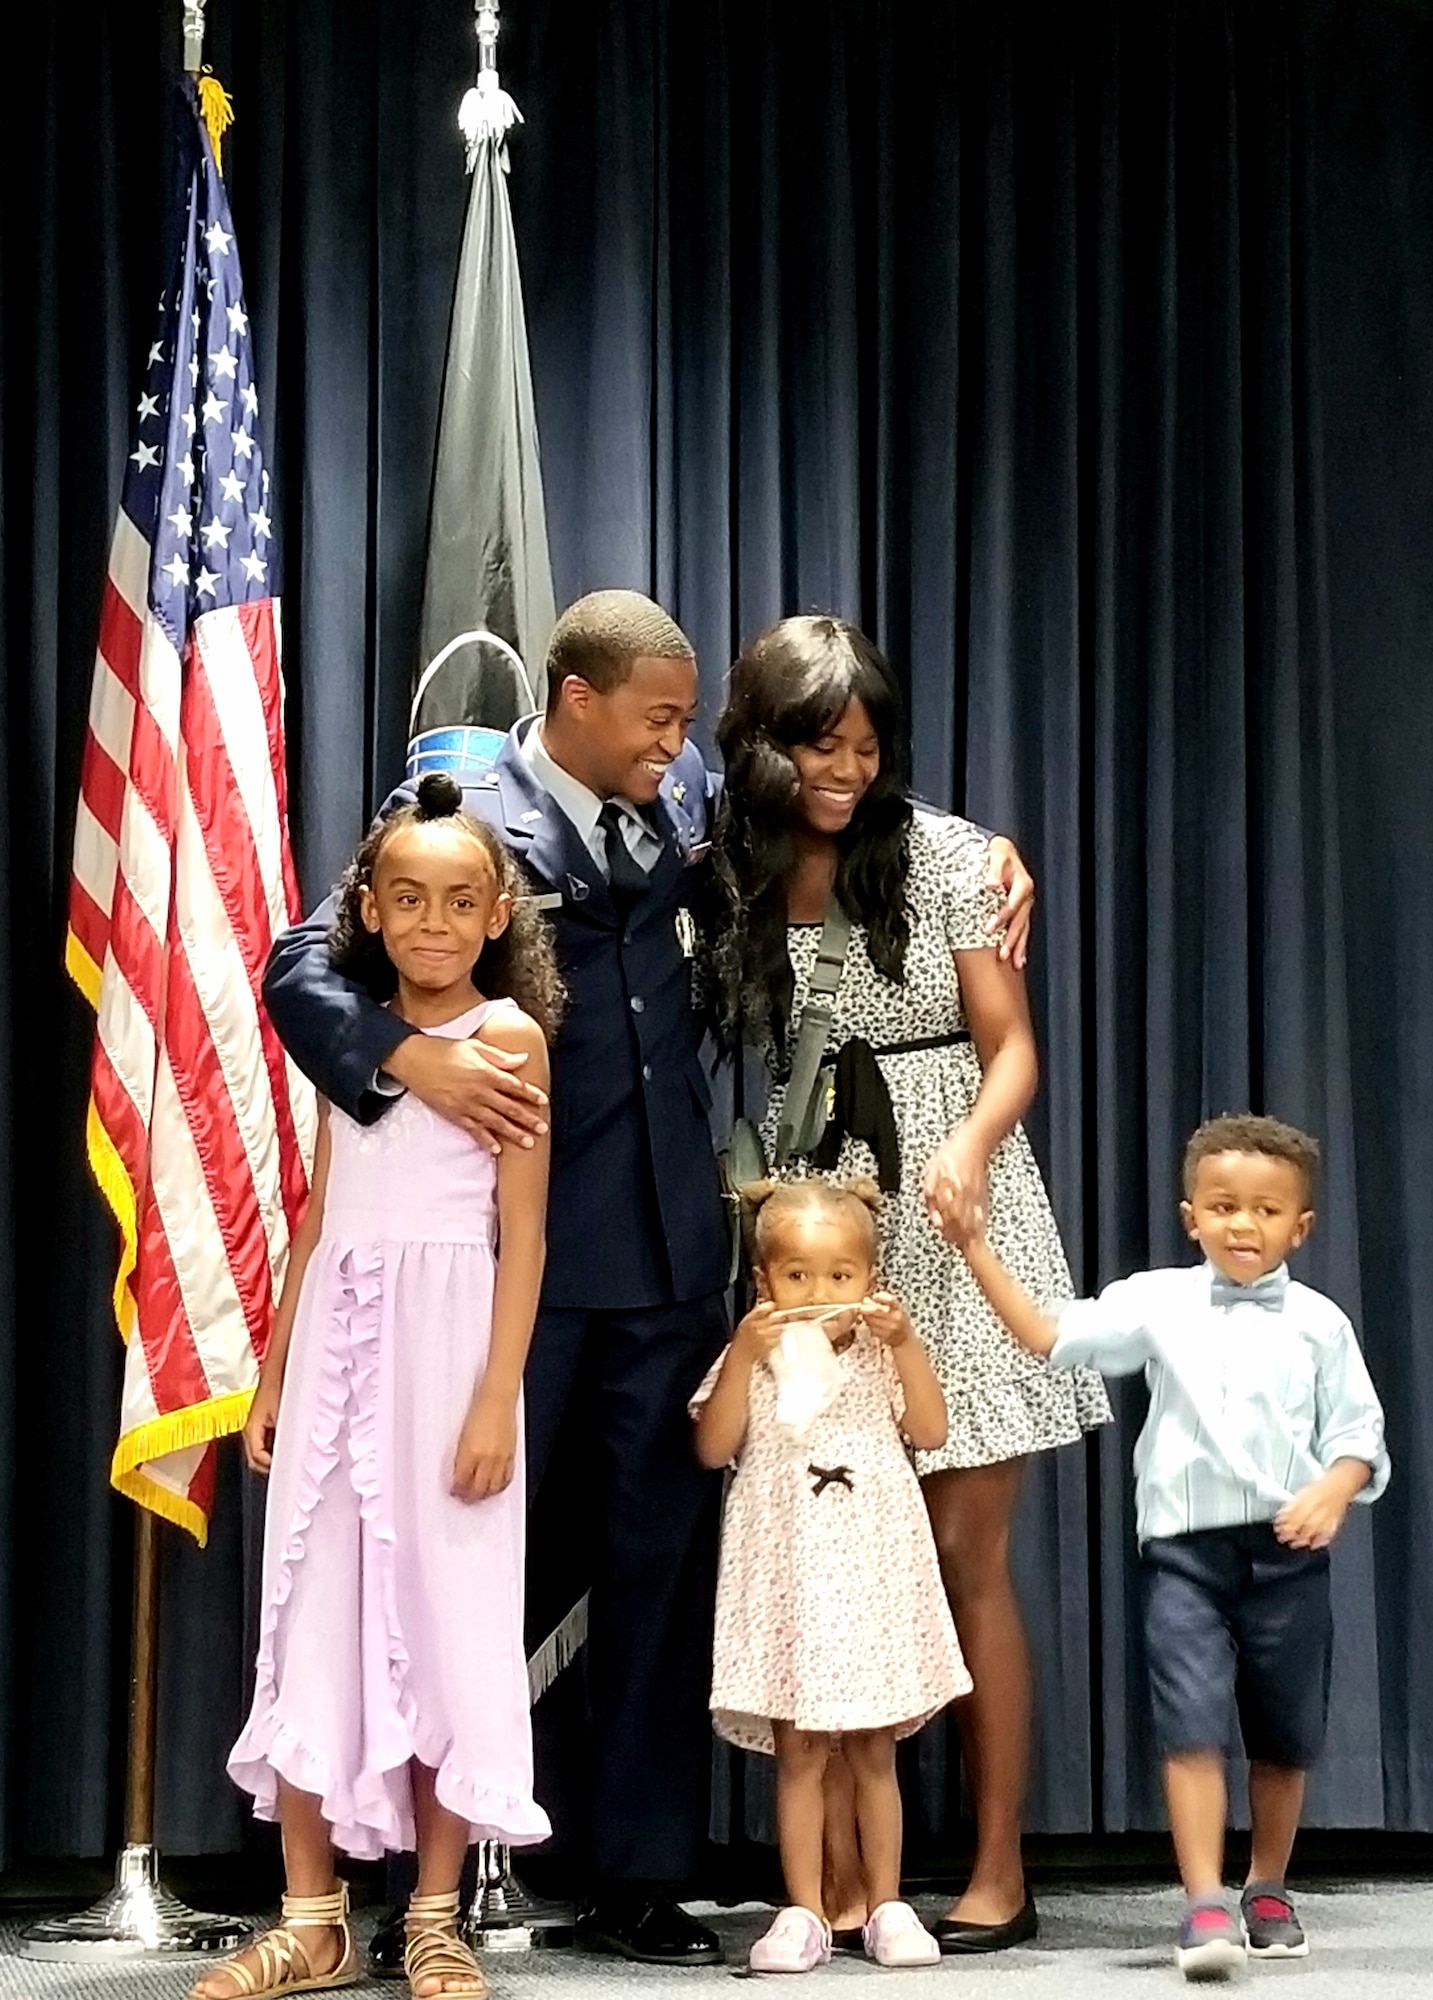 Just commissioned U.S. Space Force officer Maj. Derick Perry shares the moment with his wife Melissa and children. Perry was one of 10 Air Force Research Laboratory and Space and Missile Systems Center officers inducted into the Space Force in a ceremony held at Kirtland AFB, N.M. July 23. (U.S. Air Force photo/Joanne Perkins/AFRL)